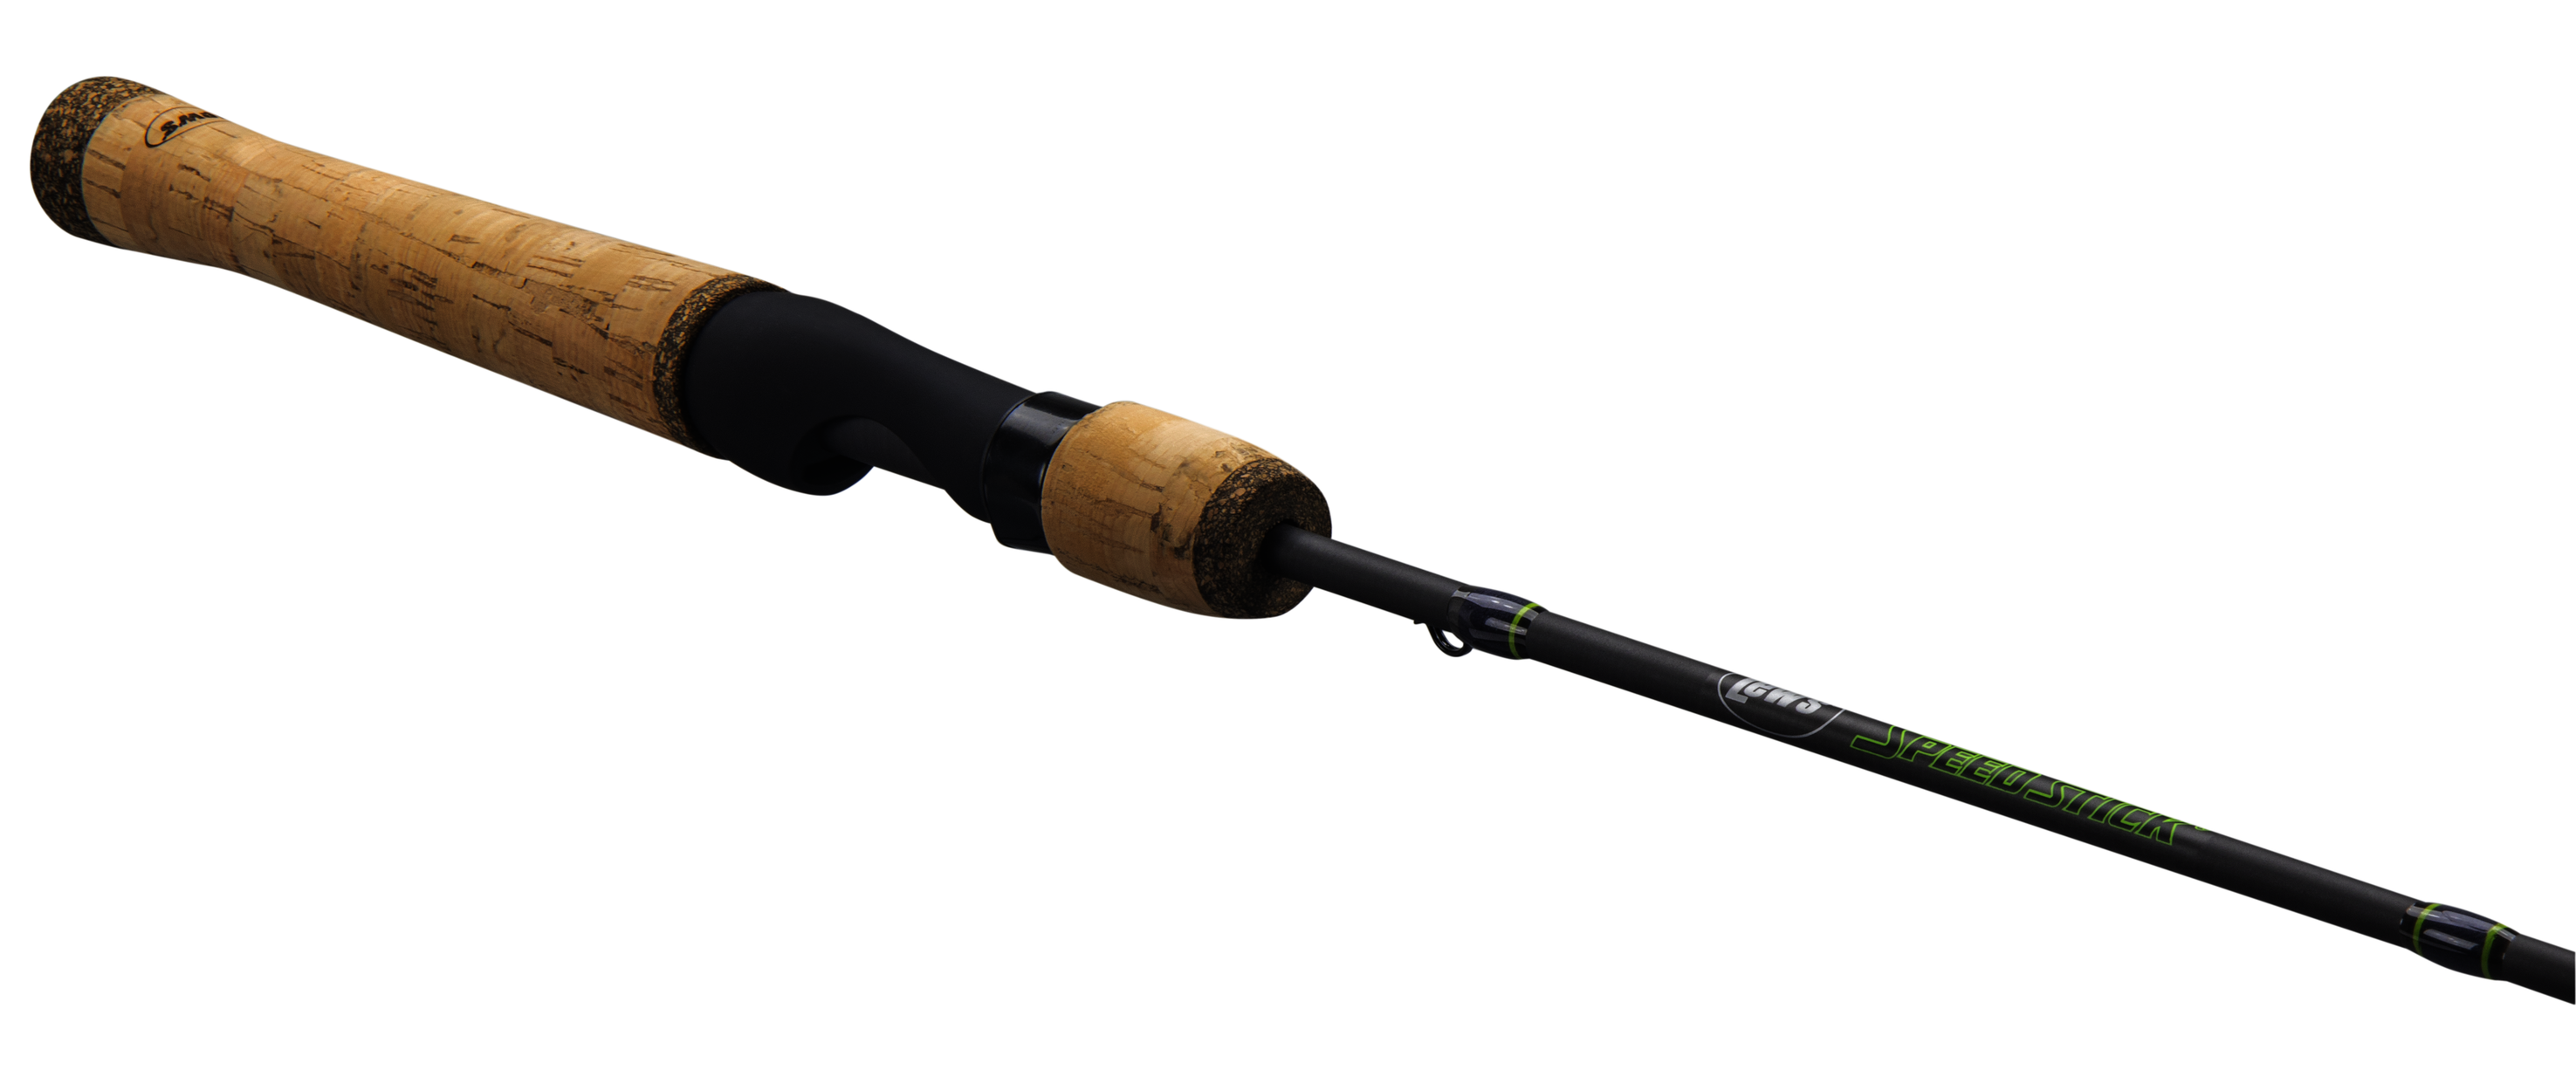 13 FISHING - Muse Black - 7'6 MH Mod Casting Rod - MBC76MHM, Spincasting  Rods -  Canada